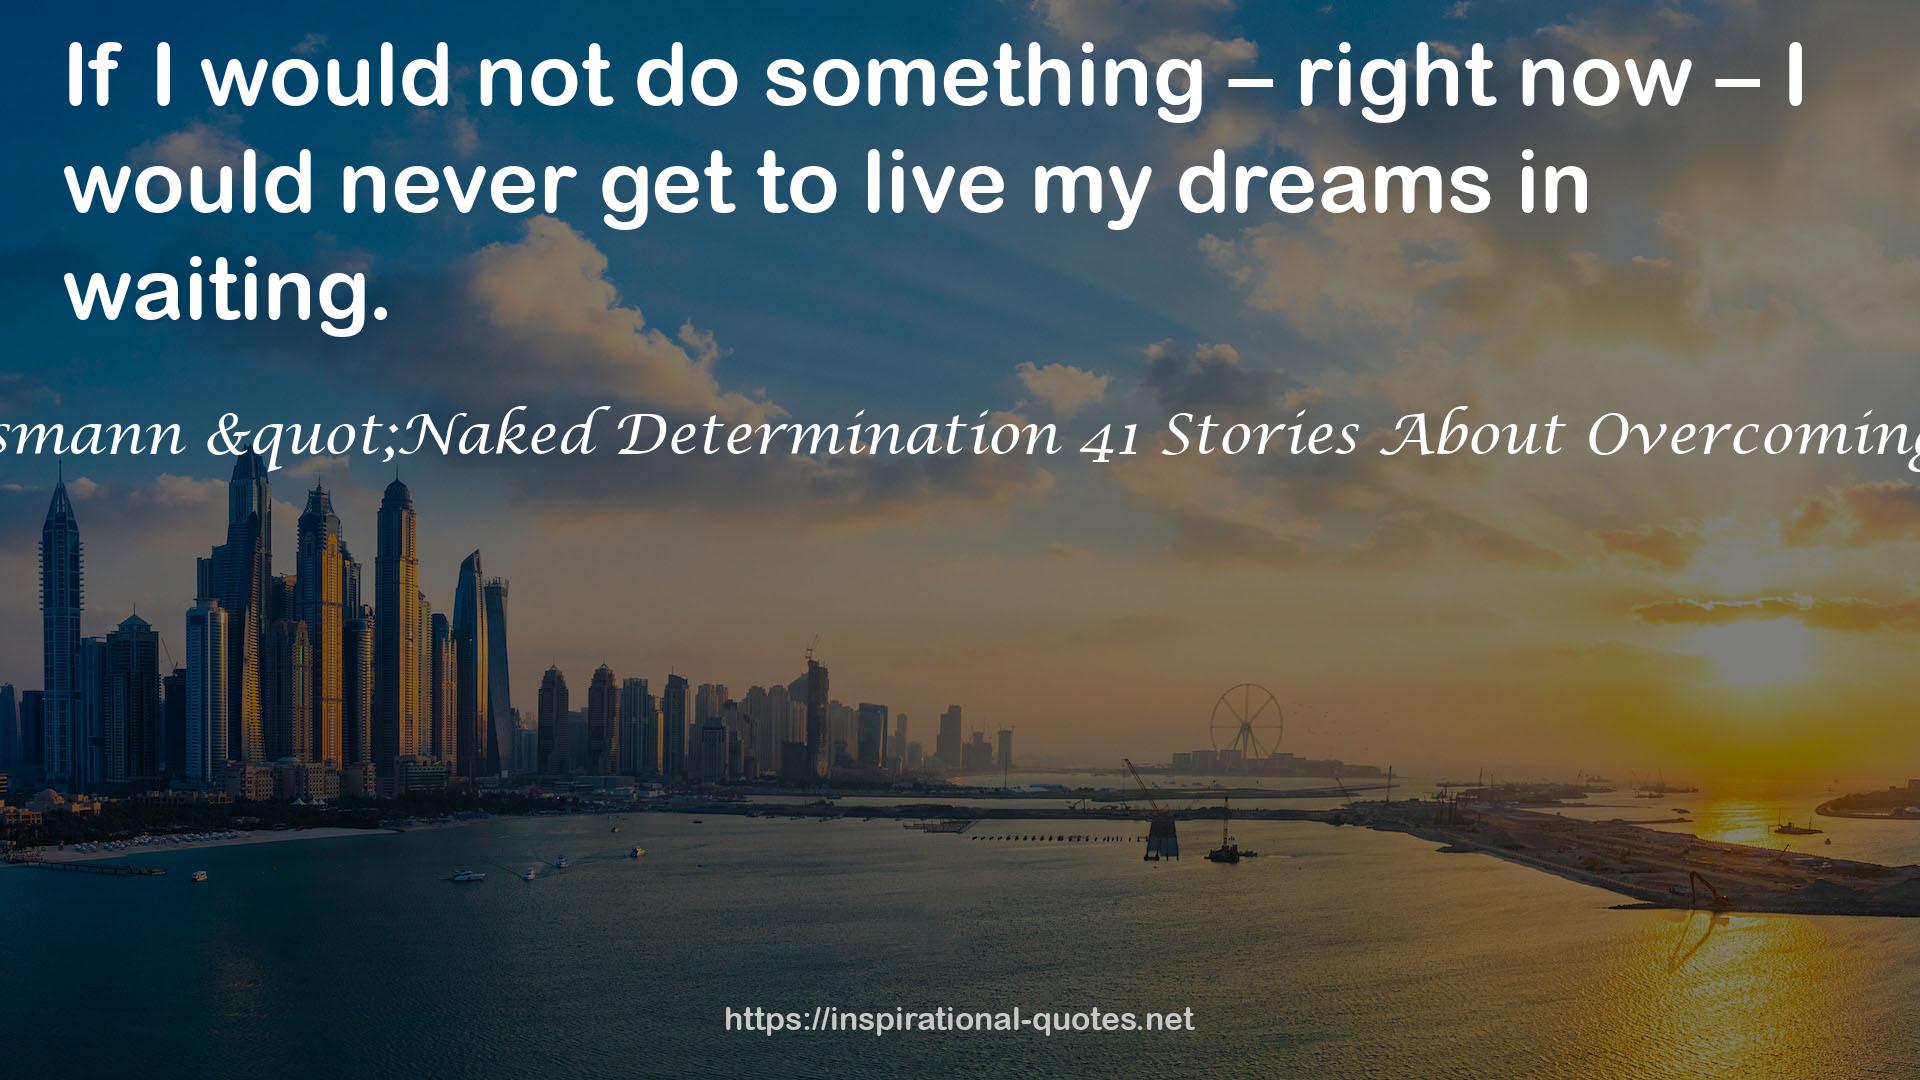 Gisela Hausmann "Naked Determination 41 Stories About Overcoming Fear" QUOTES